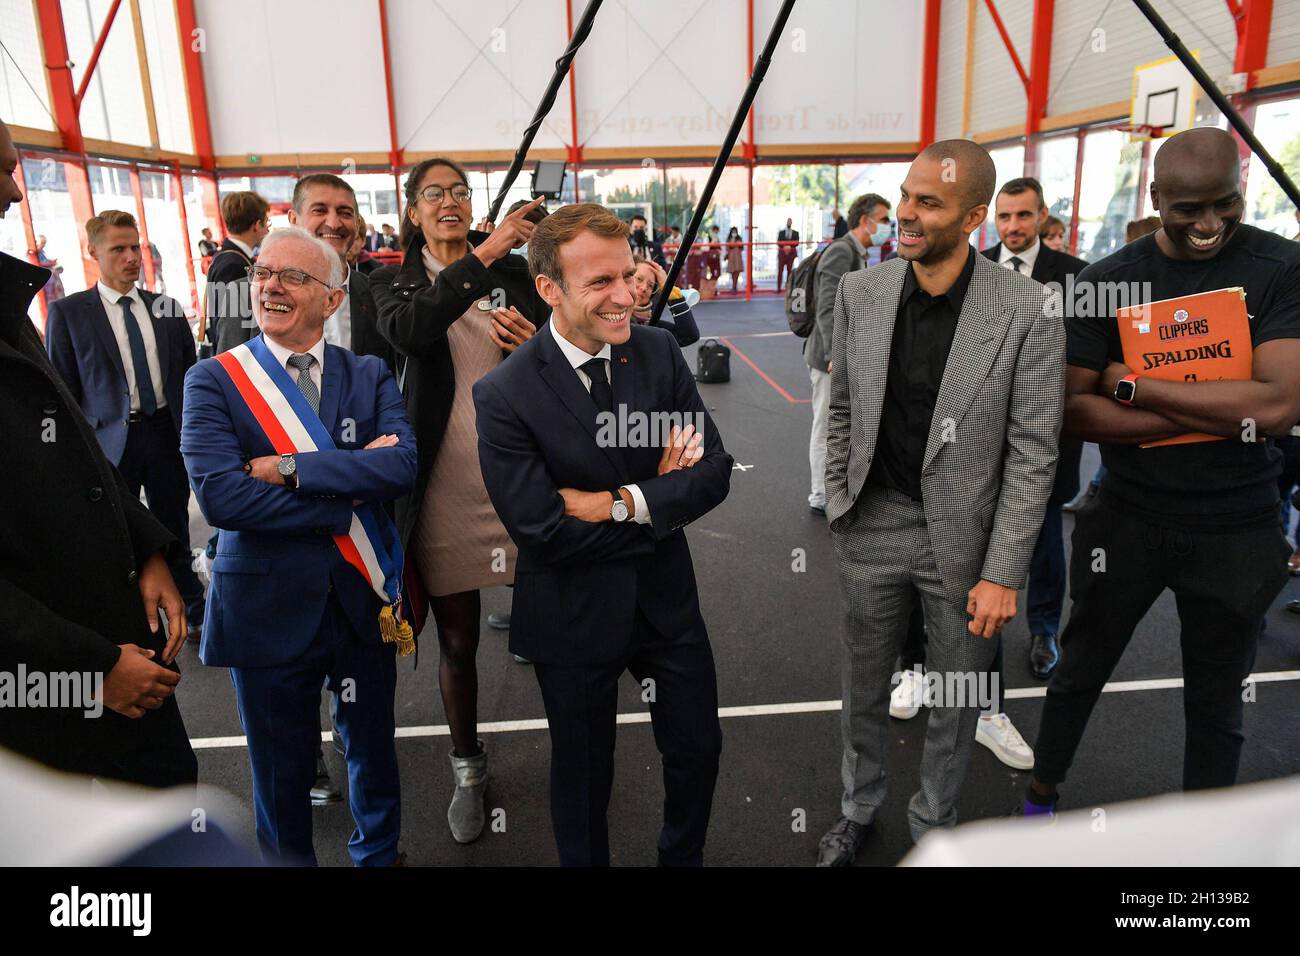 French président Emmanuel Macron, accompanied by the Minister of National Education, Youth and Sport, Jean-Michel Blanquer, Roxana Maracineanu, Minister Delegate, in charge of Sport, mayor of Tremblay en France, Tony Estanguet, Tony Parker, Clementine Autain visited the sports hall in Tremblay en France on 14 October 2021, as part of his visit to the Paris 2024 Olympic and Paralympic Games, to meet with young users and presidents of sports federations Handball, Judo, Basket, Tennis. Tremblay en France, ocotber 14, 2021. Photo by ISA HARSIN/Pool/ABACAPRESS.COM Stock Photo